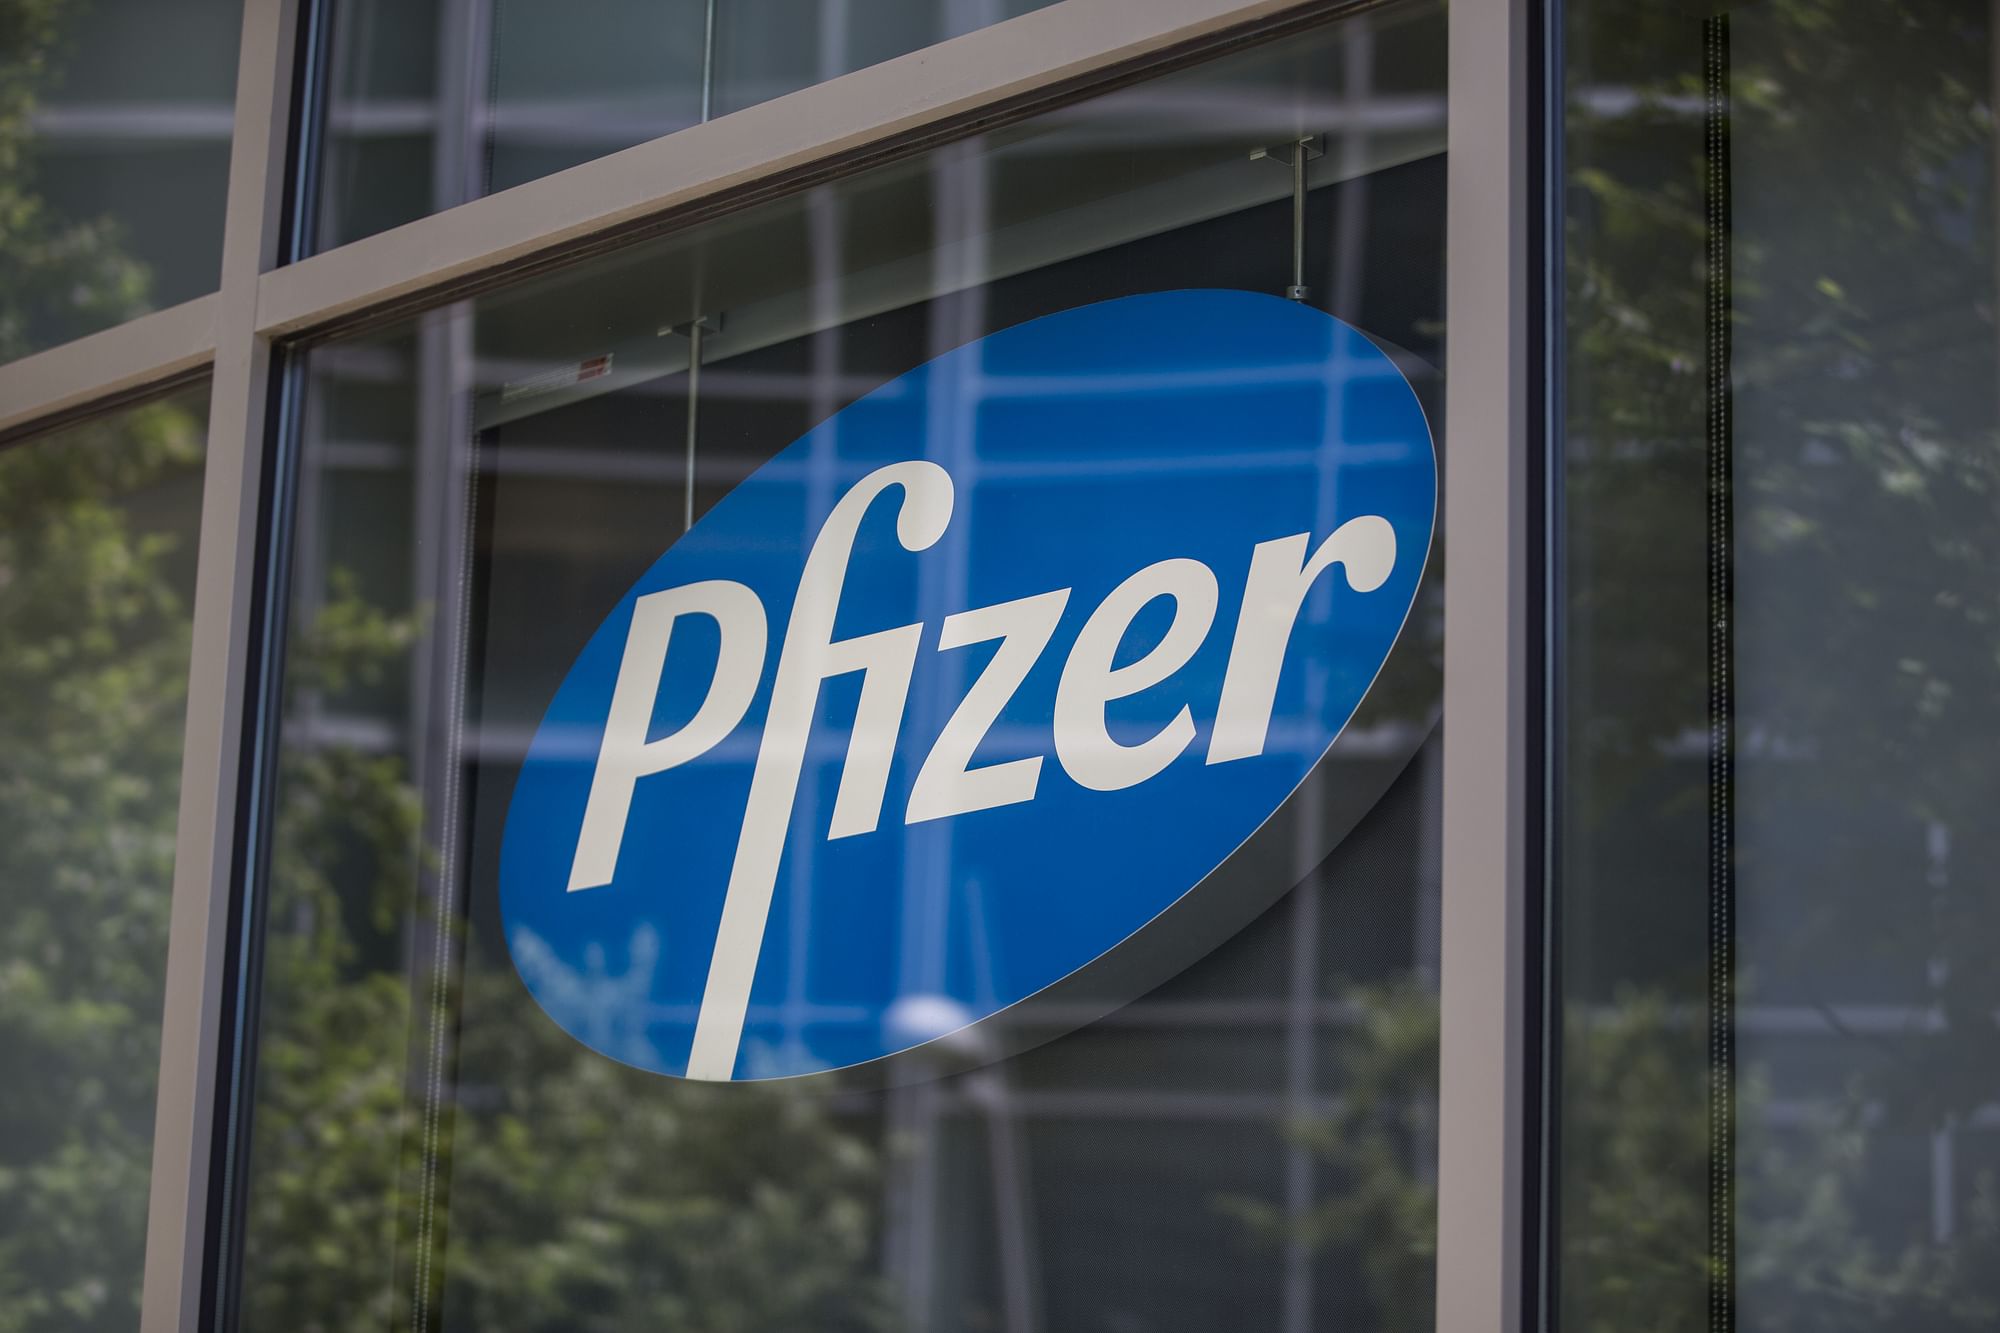 PFIZER IS HIRING ASSOCIATE, DATA SCIENTIST IN WORK FROM HOME